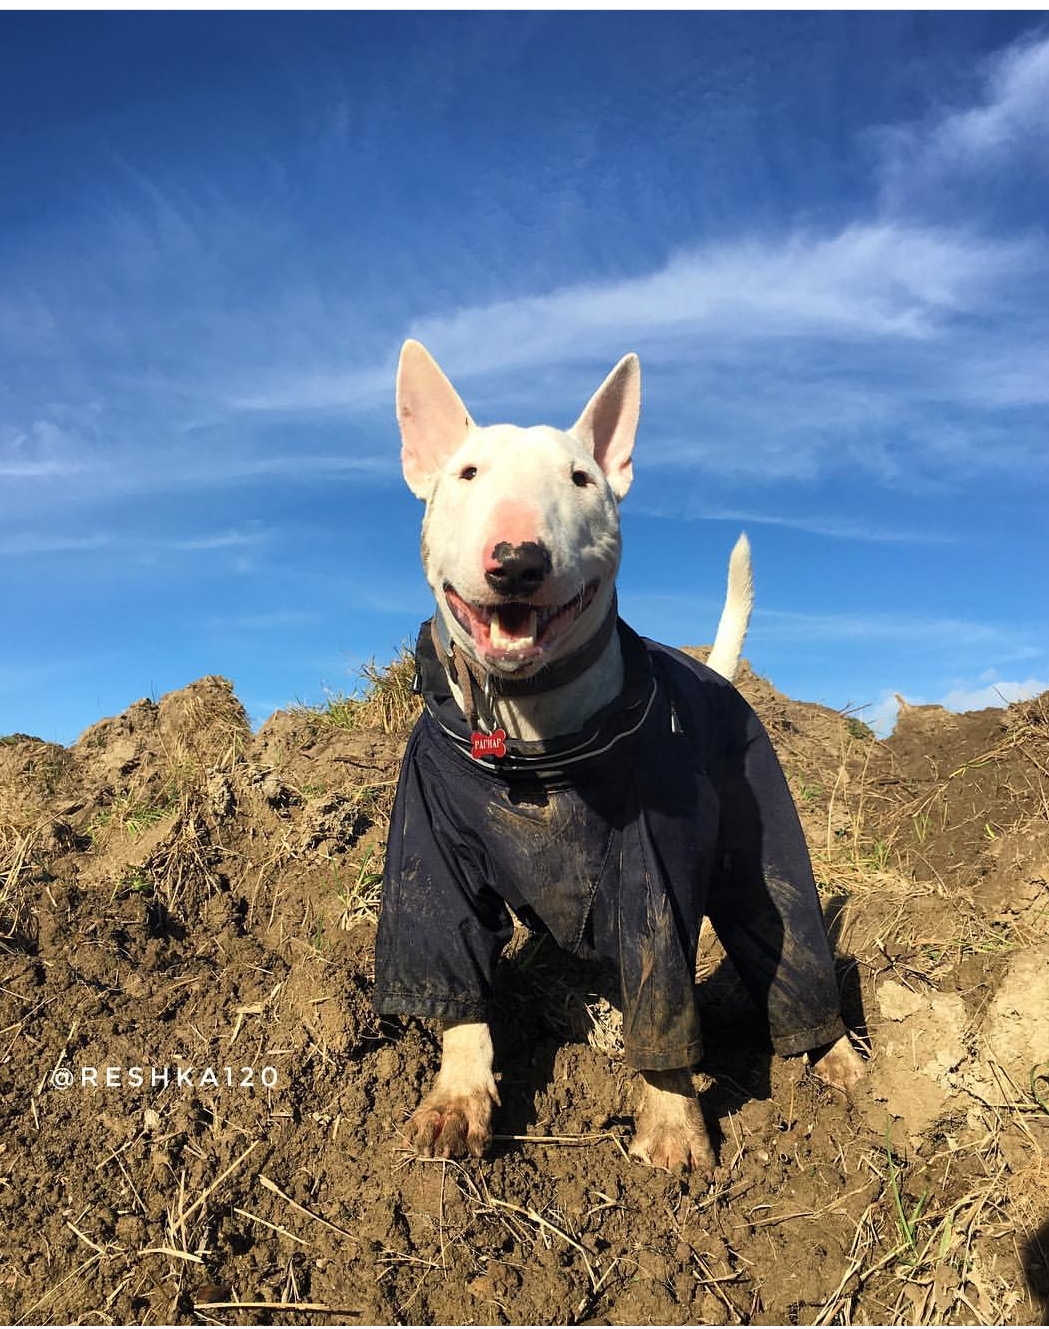 English Bull Terrier outdoors on the dirt wearing a jacket